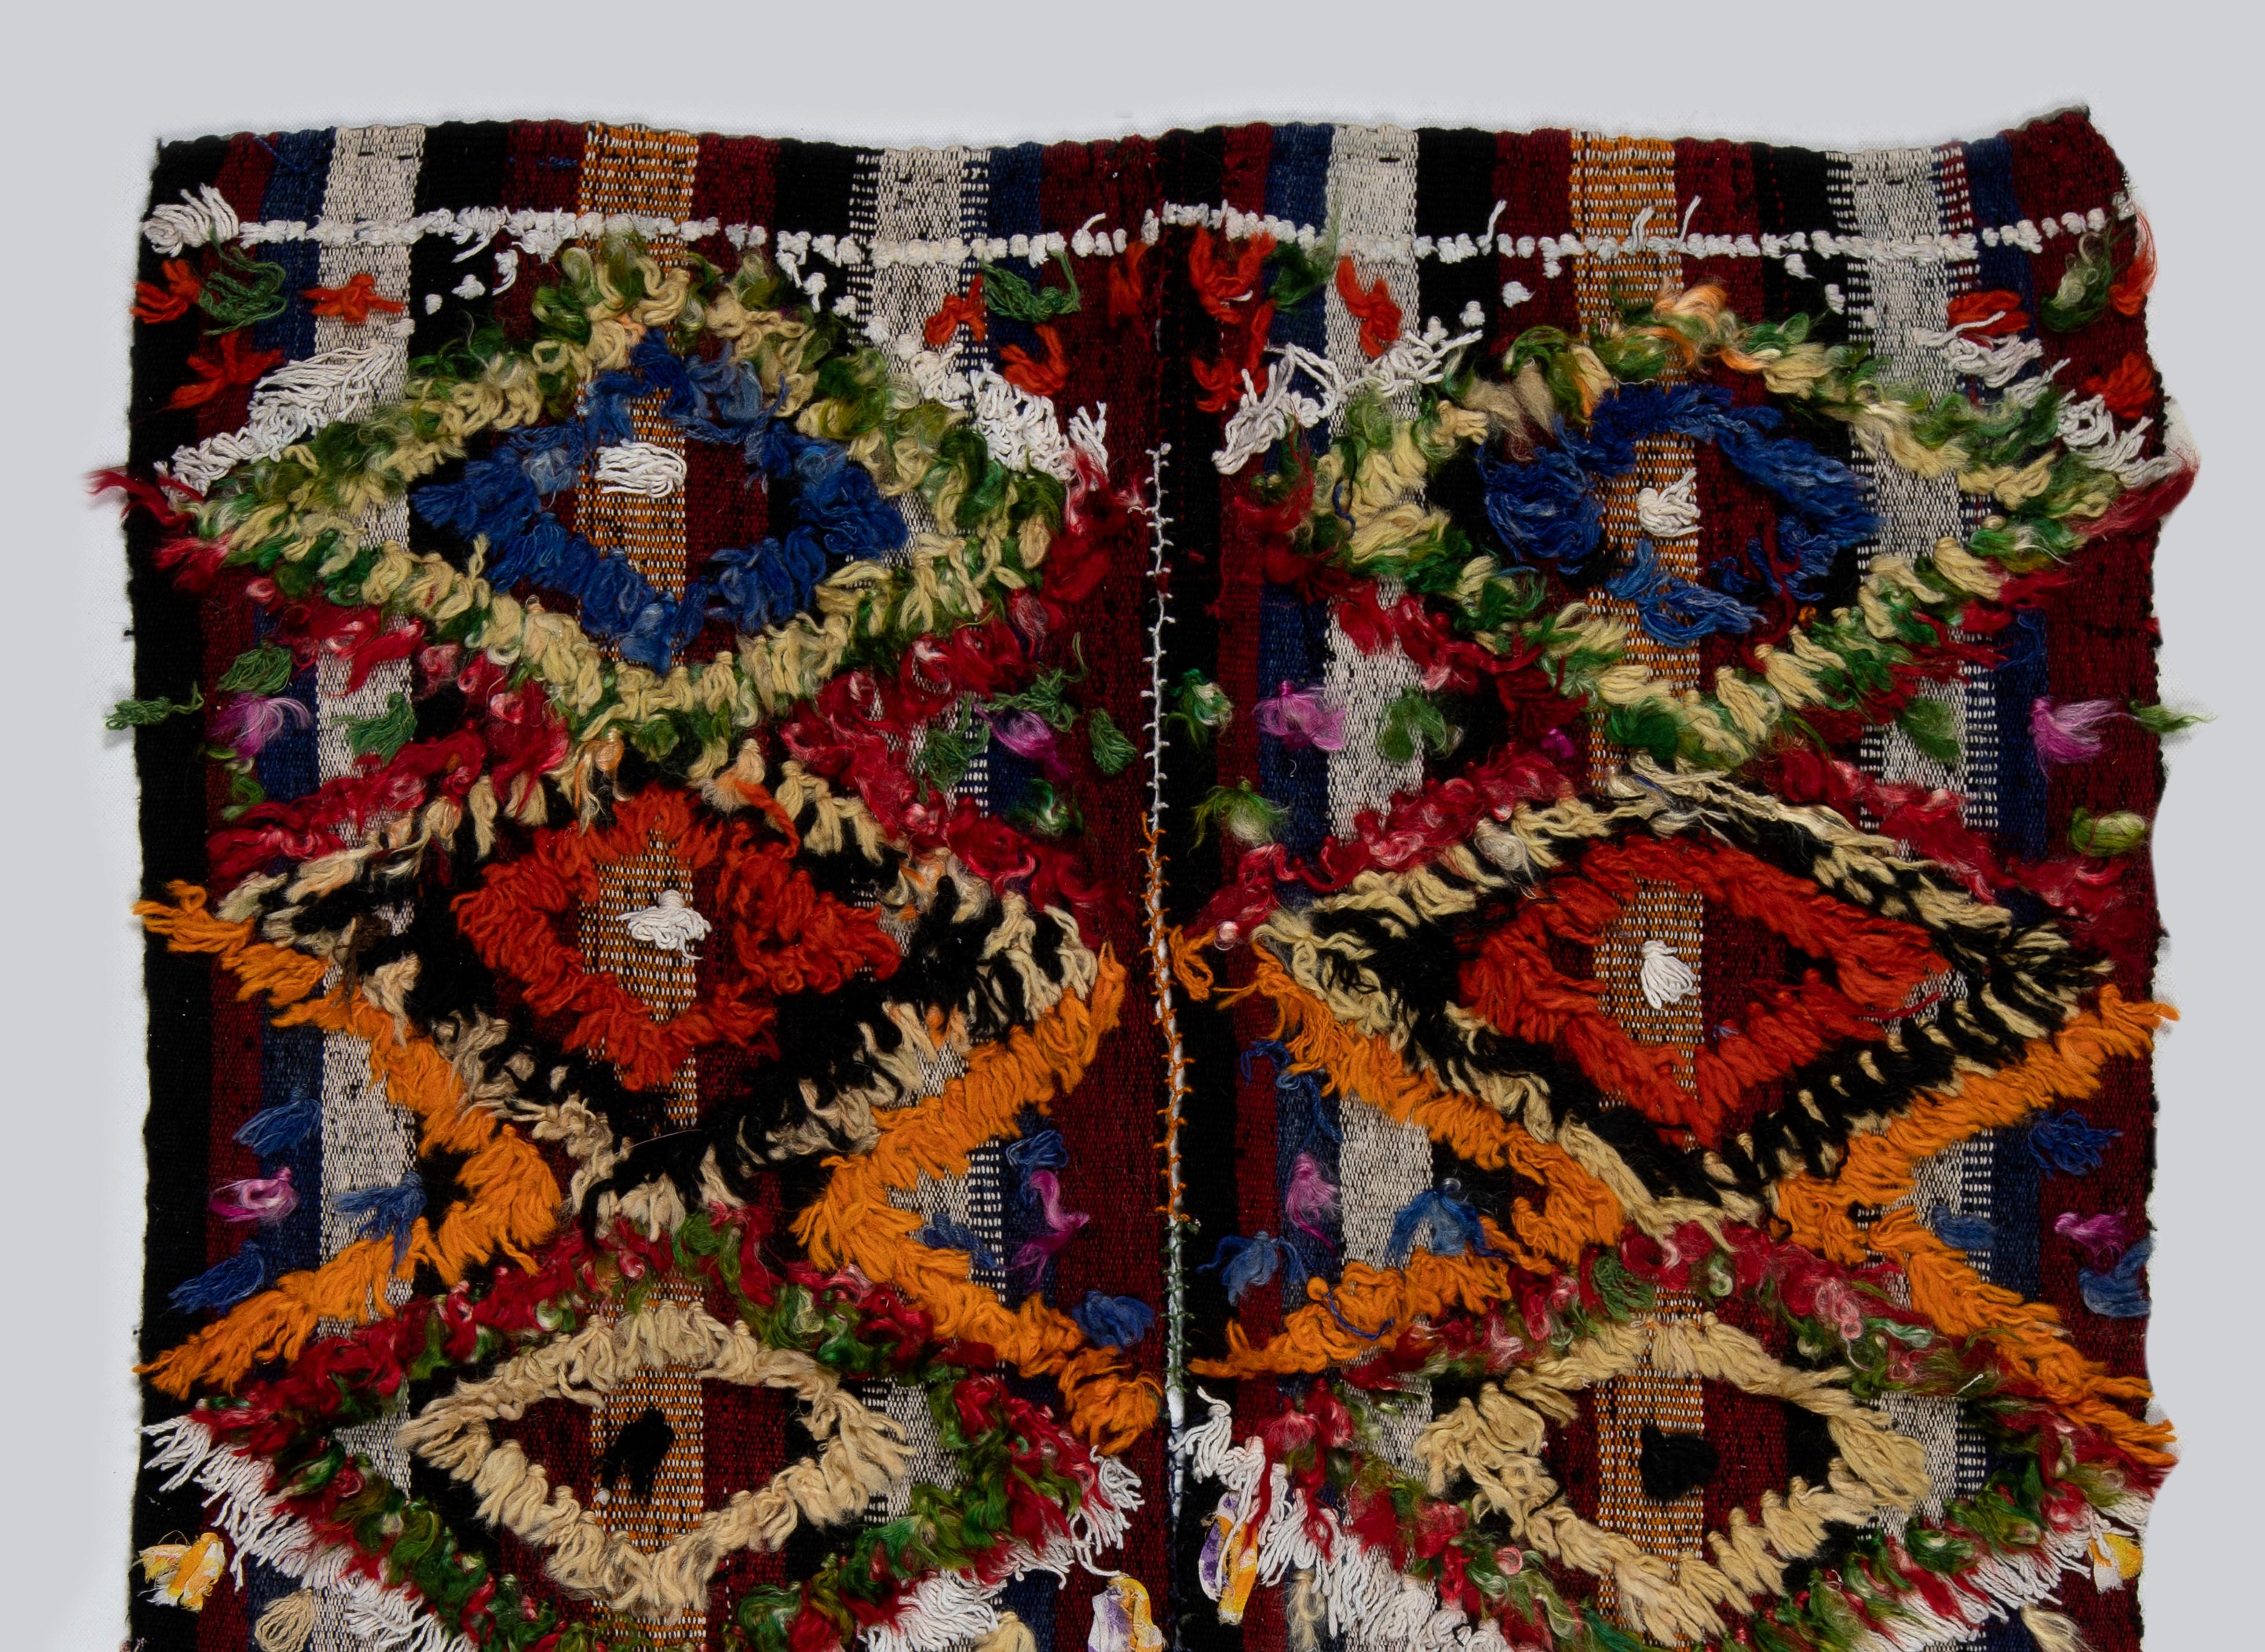 This lively handwoven rug was produced by Kurdish villagers in Central Turkey for daily use in third quarter of the 20th century. These splendid vintage weavings were used in various ways such as wall-hangings, bedding covers, tent dividers,